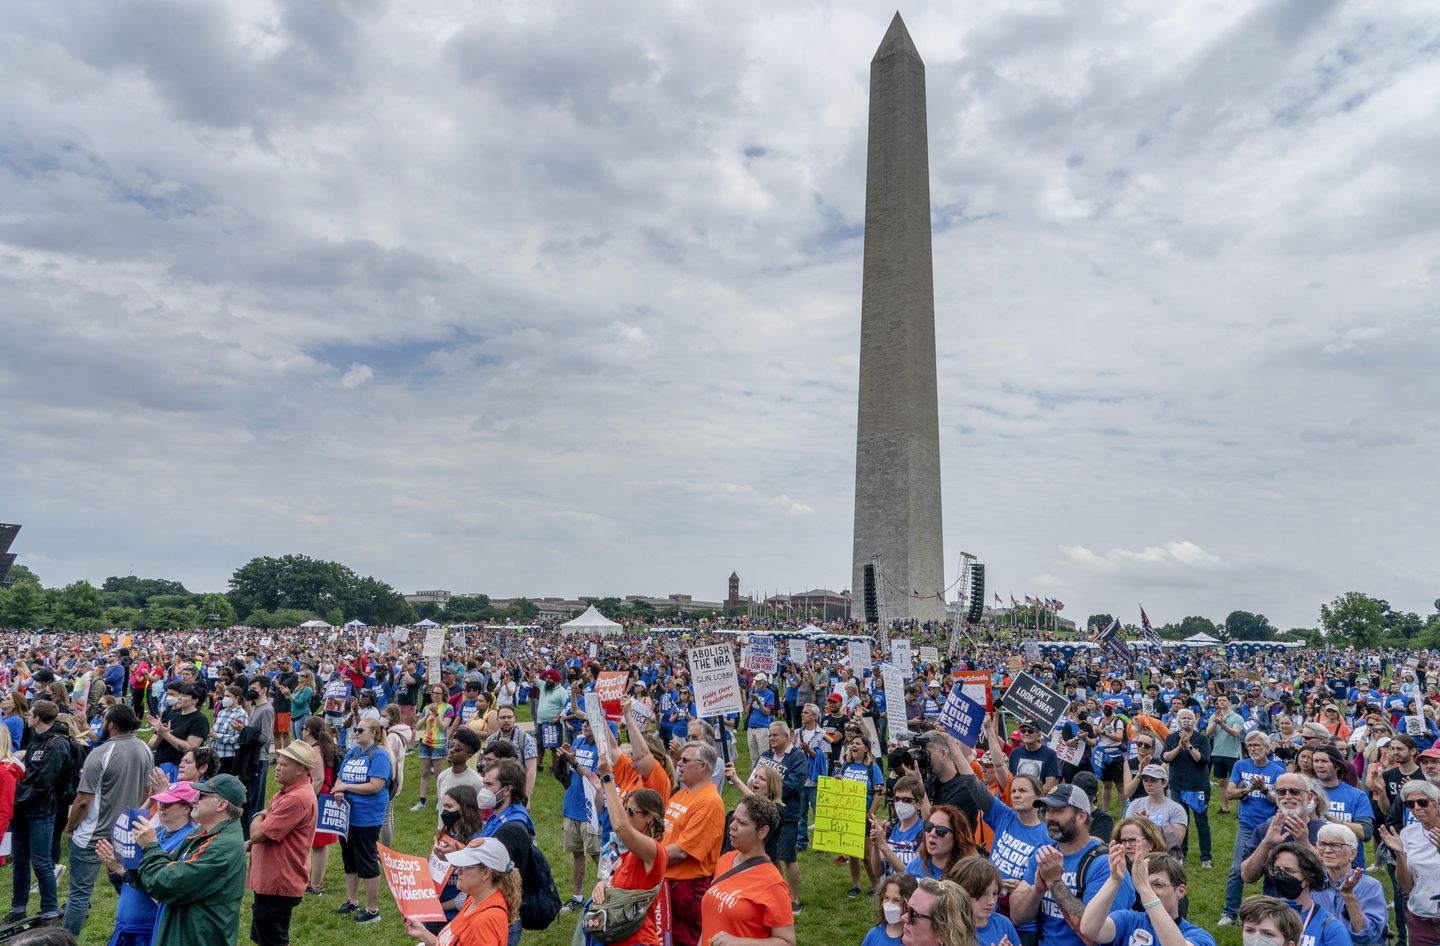 Thousands gather on National Mall to call for stricter gun laws